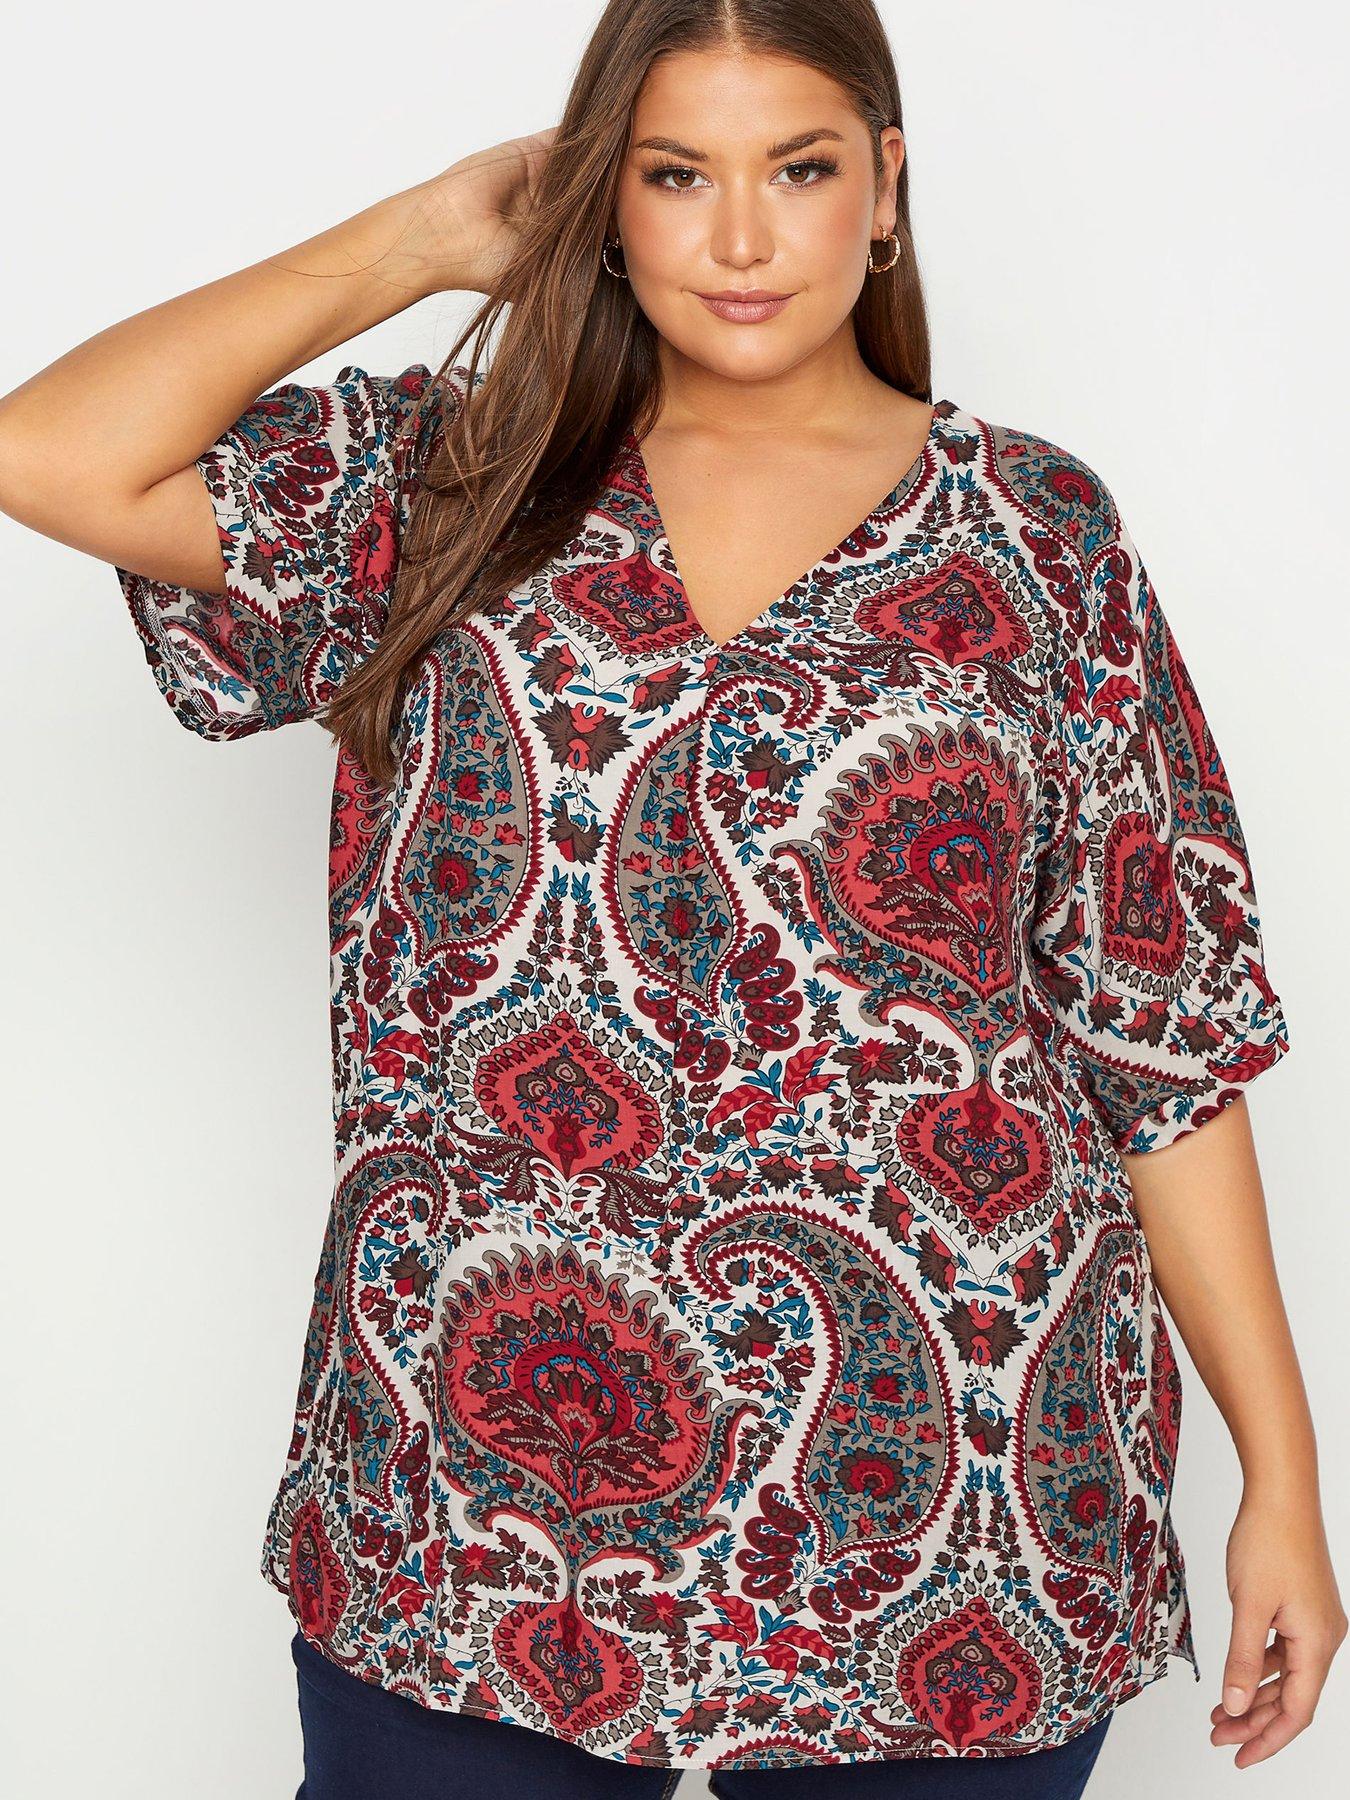 Tops & T-shirts grown on Sleeve top with pleat front - White Red Paisley